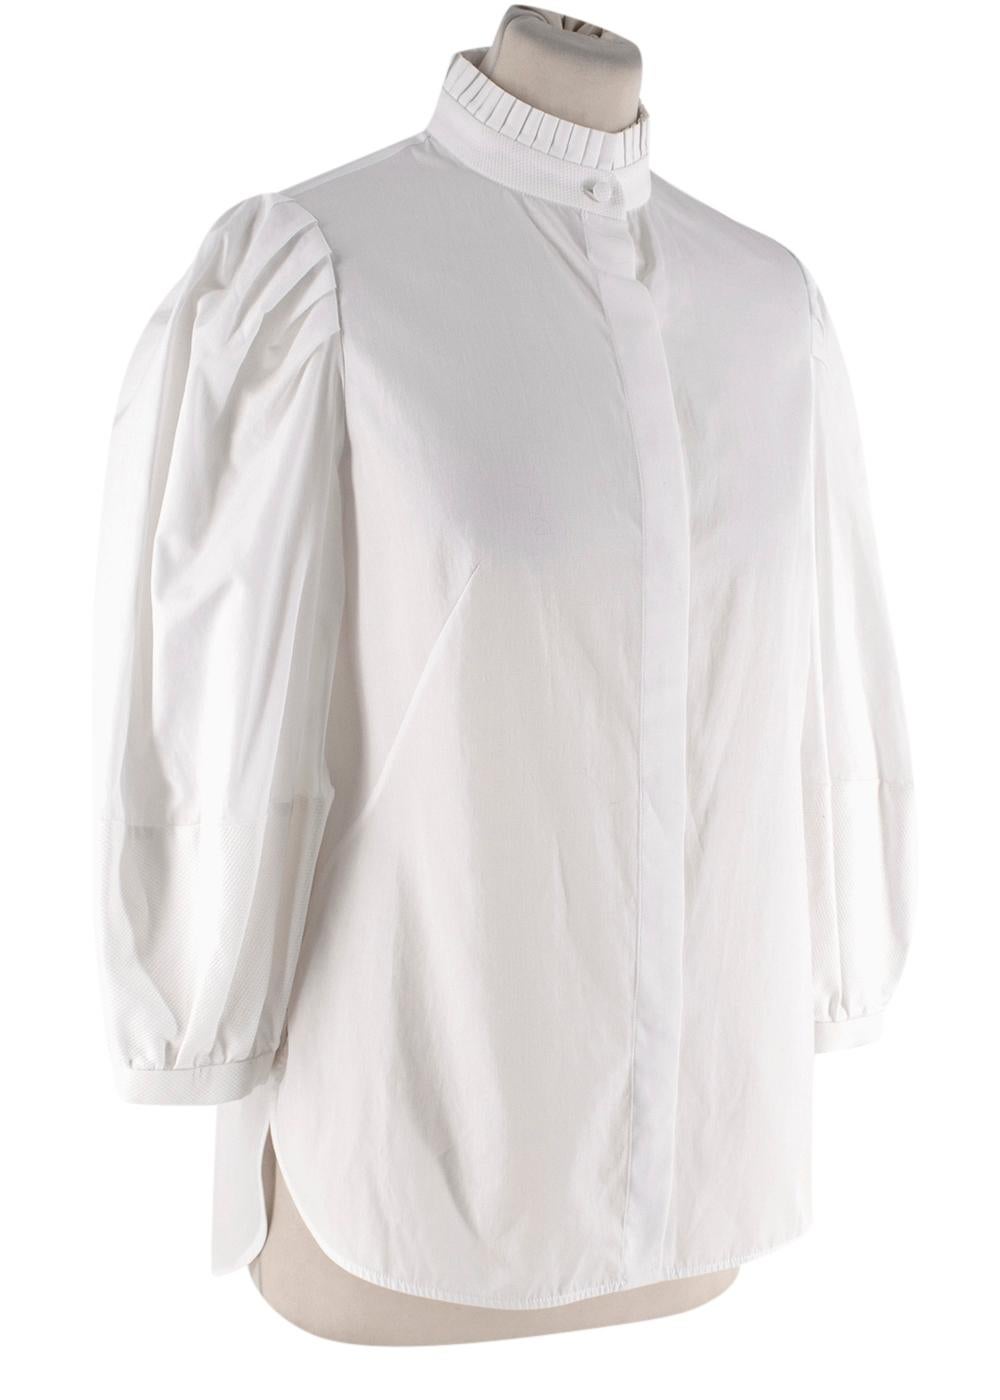 Alexander McQueen White Poplin & Waffle Cotton Shirt

- Button up white shirt crafted from poplin cotton with waffle panels to the cufffs and collar
- Pleated finished to the collar
- Balloon sleeves

Materials:
100% Cotton

Made in Italy

PLEASE